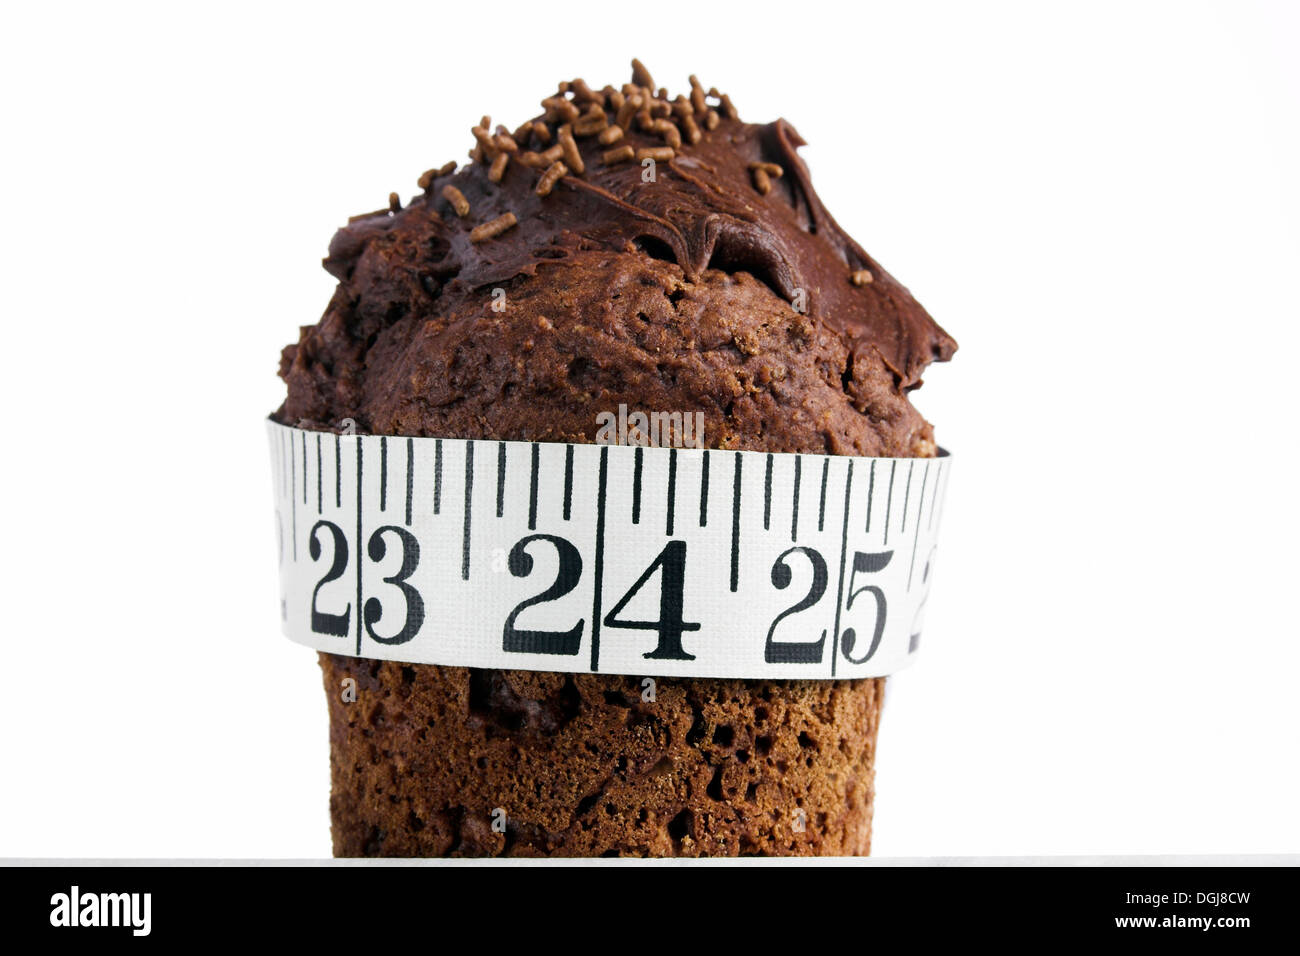 Chocolate cake with a measuring tape wrapped around it signifying weight gain. Stock Photo